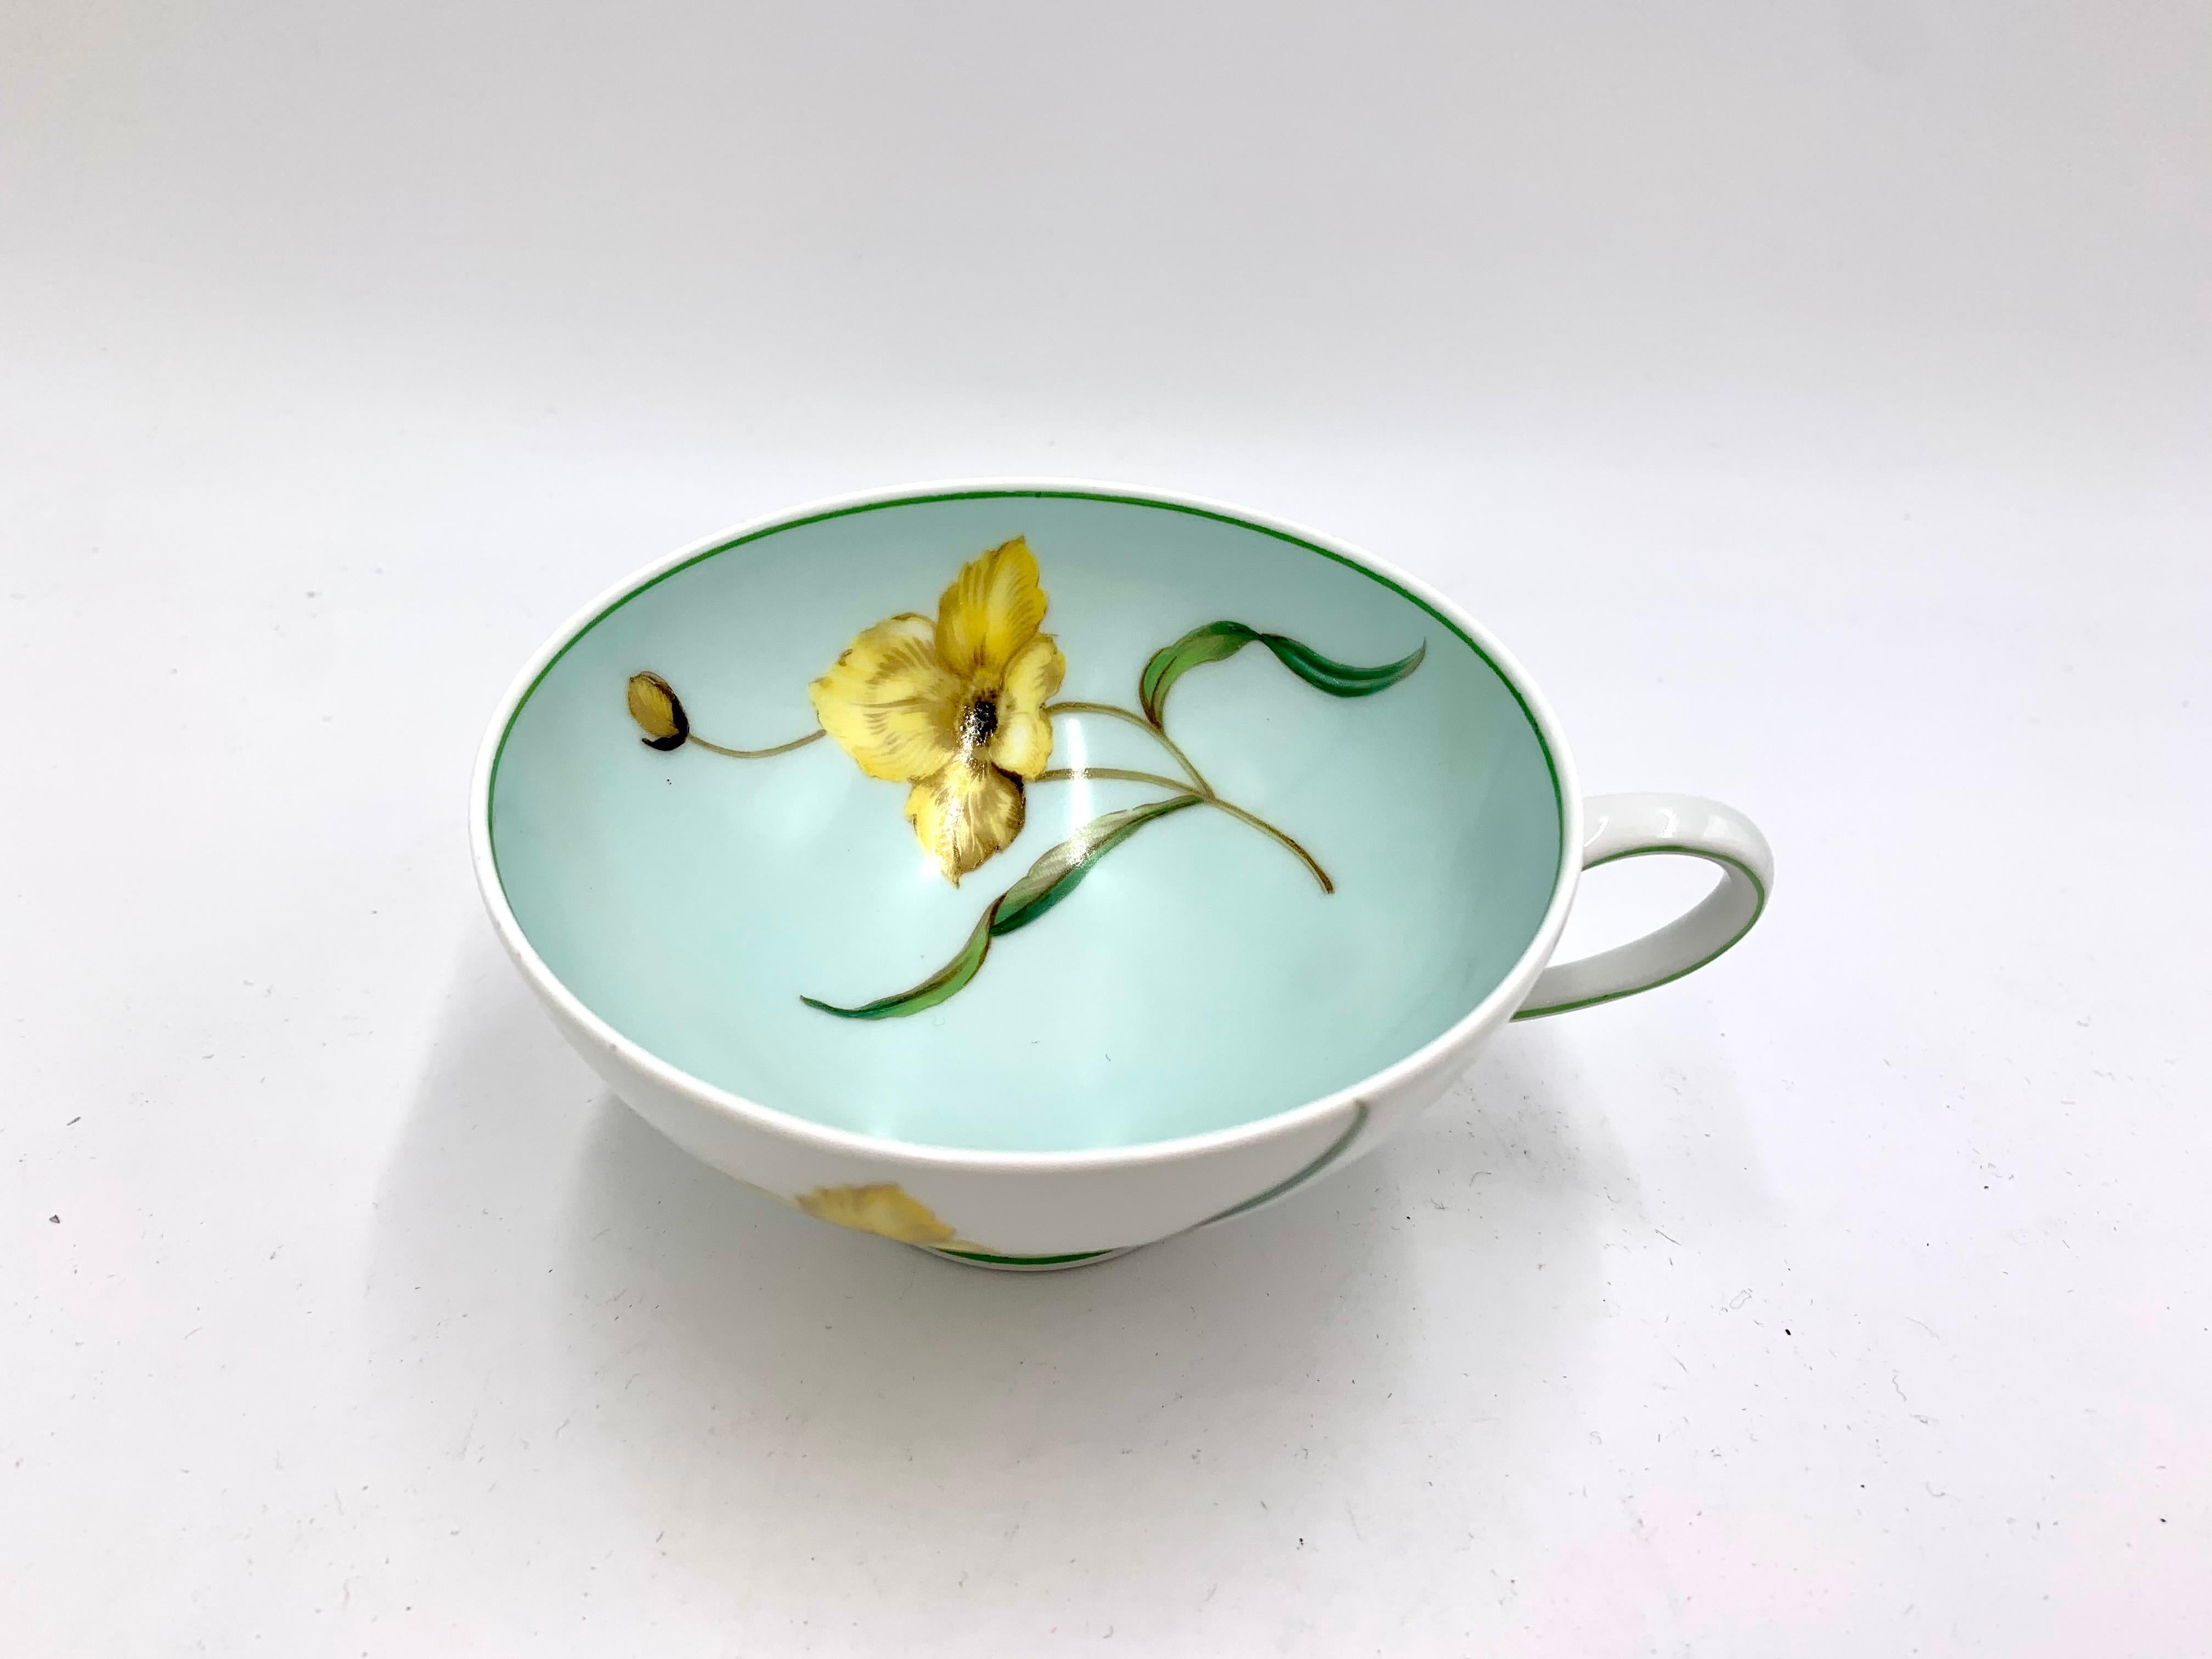 20th Century Porcelain Cup with Daffodil Rosenthal, Breakfast Set, Germany